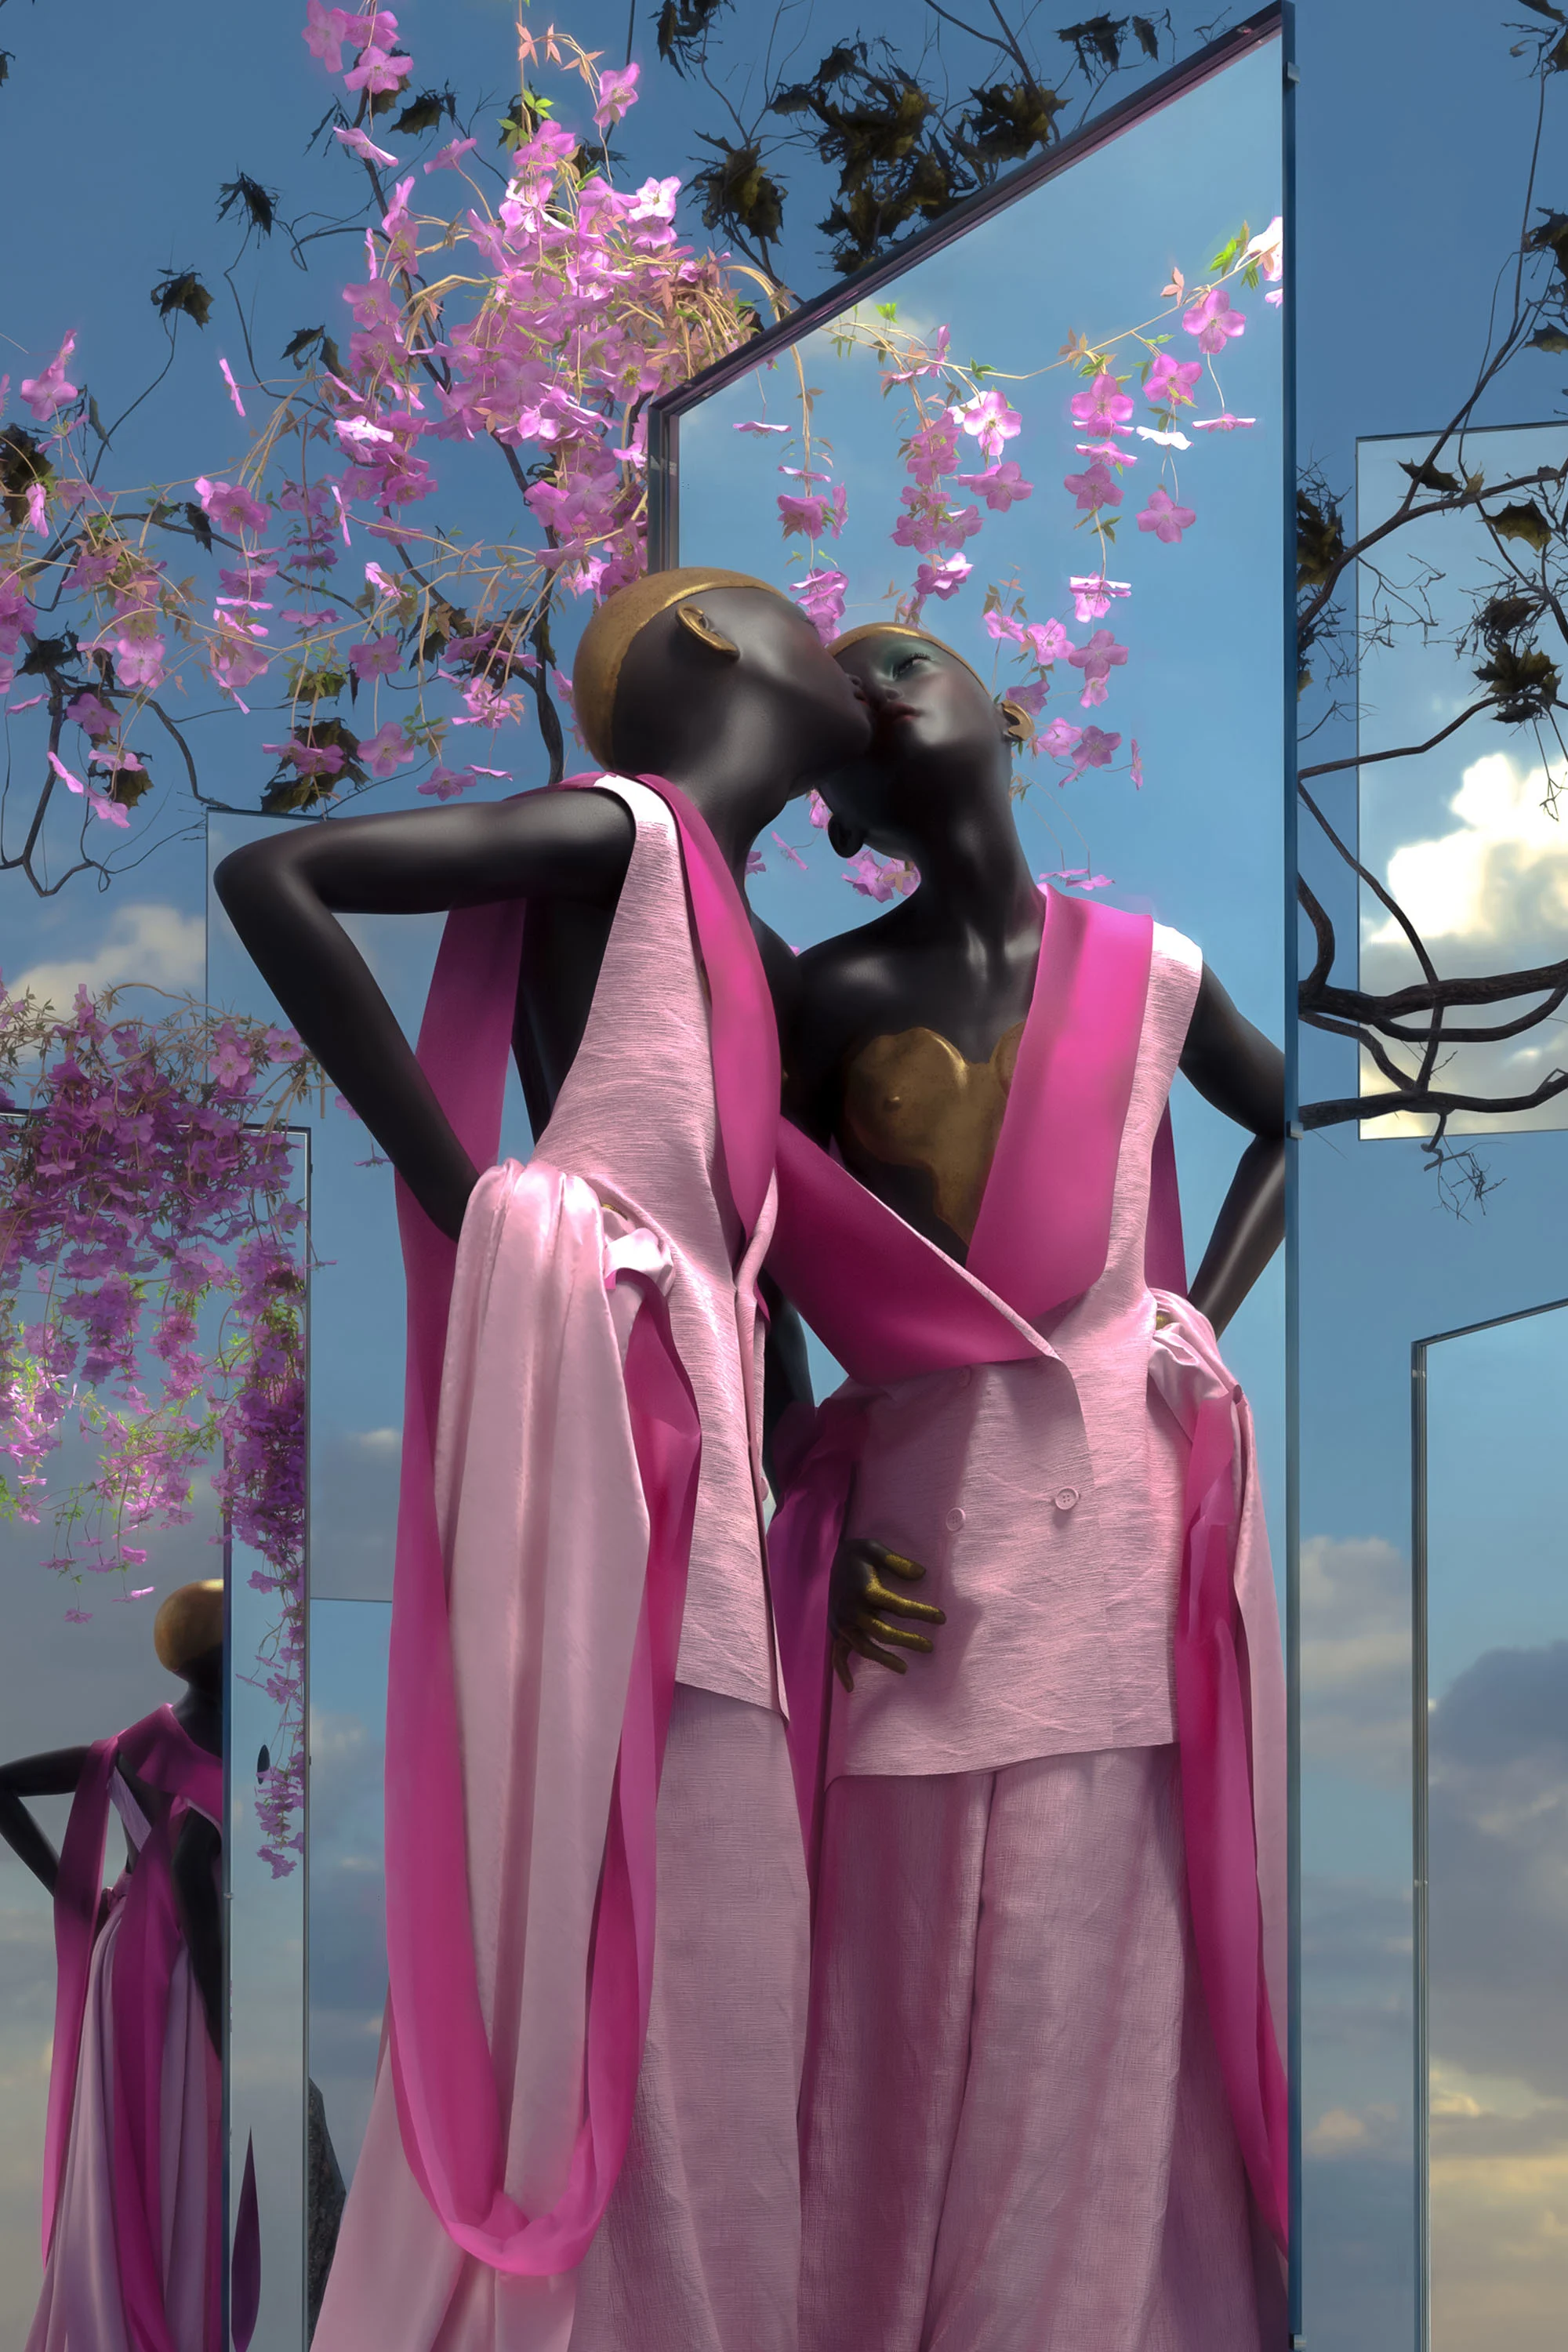 A digitally-rendered image of a figure wearing a pink dress, surrounded by pink flowers and kissing their own reflection in a mirror.